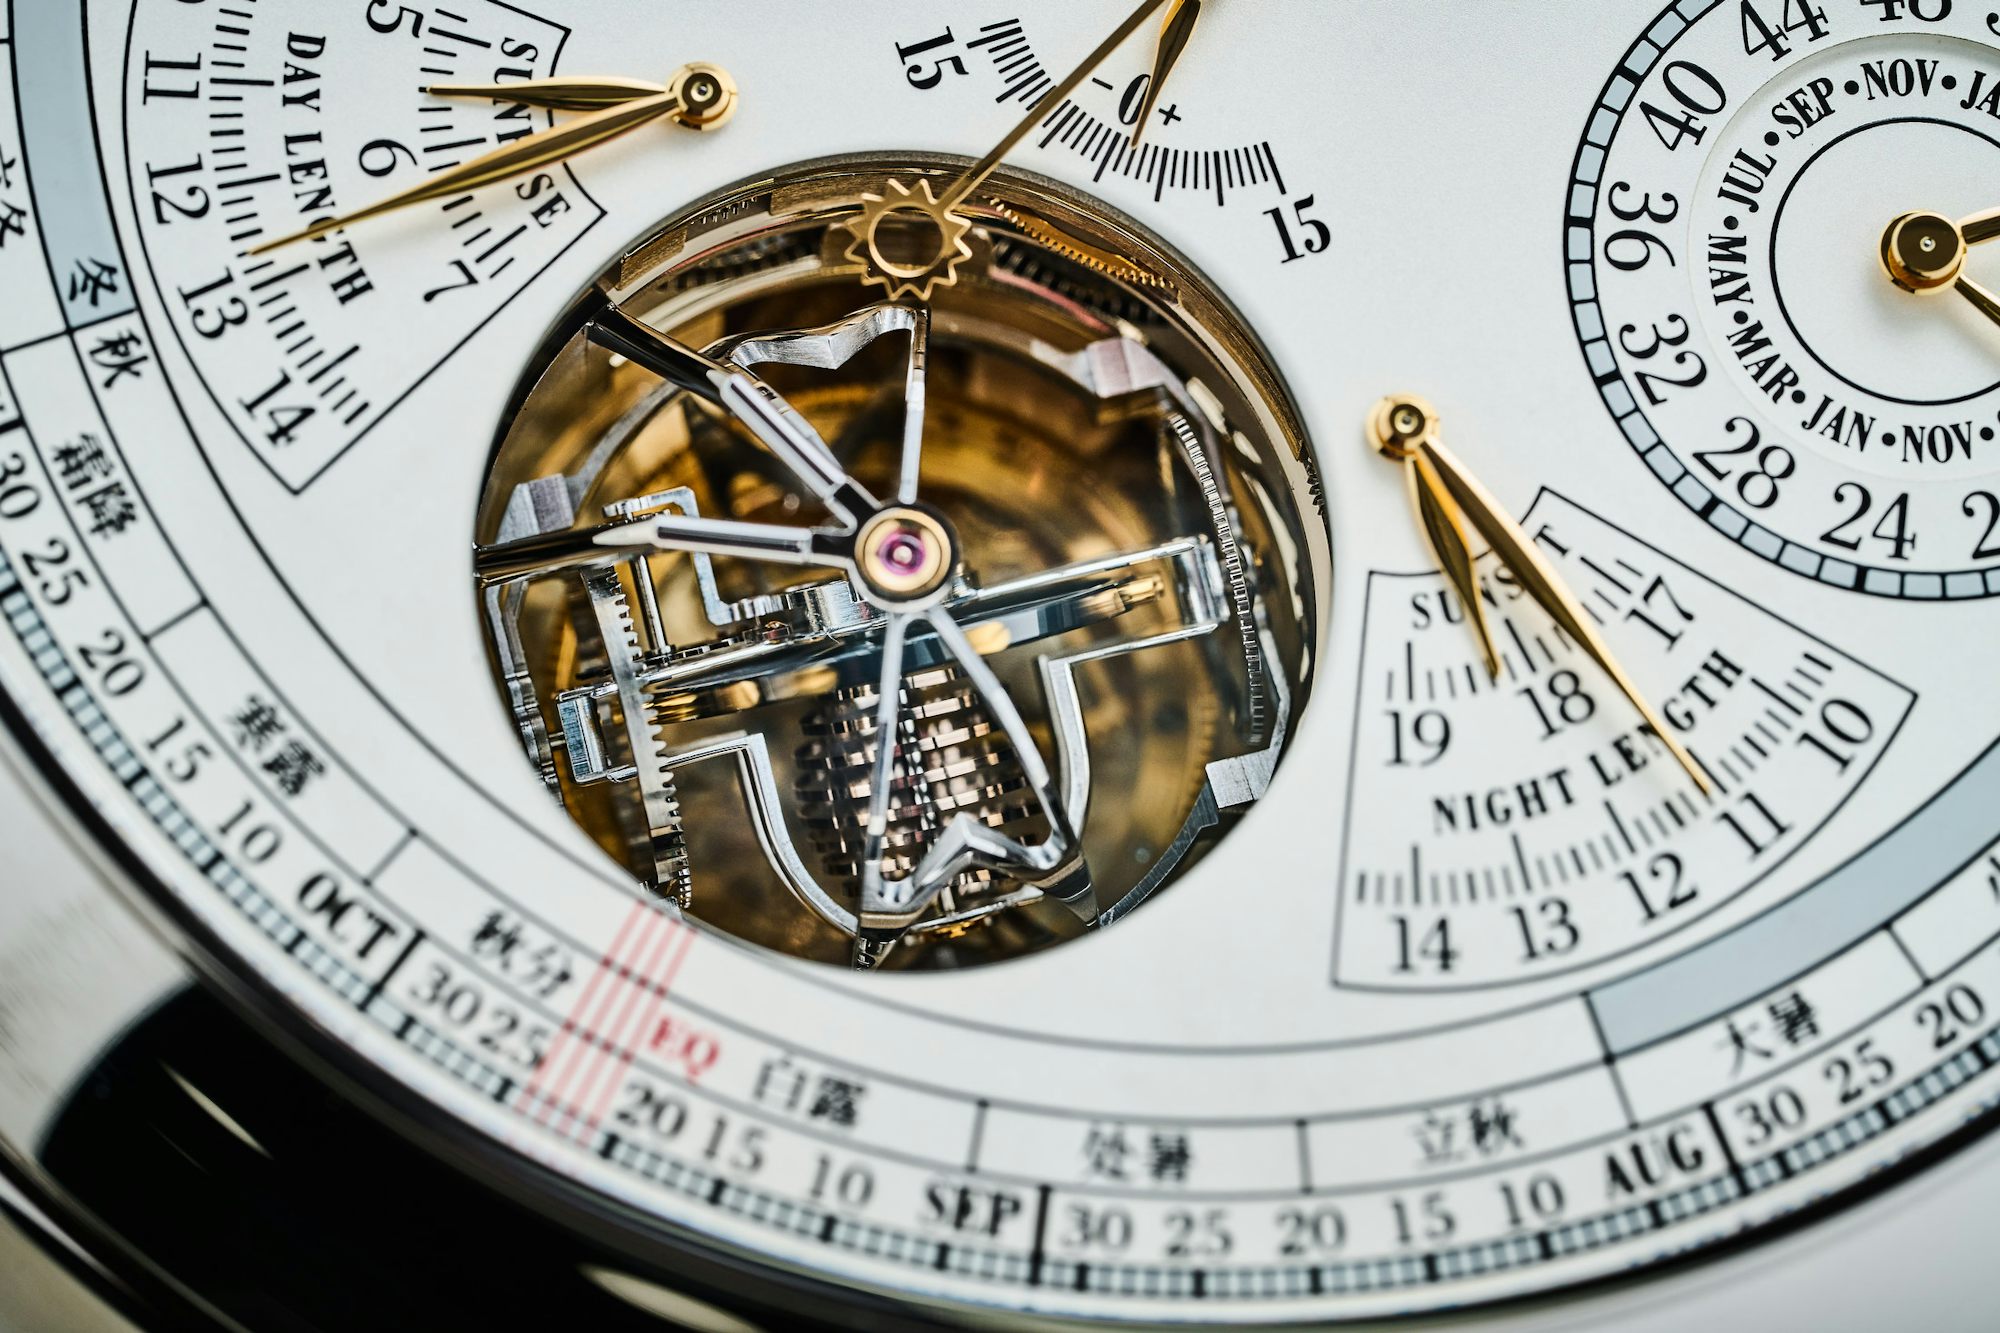 Tourbillon on the back of the pocket watch